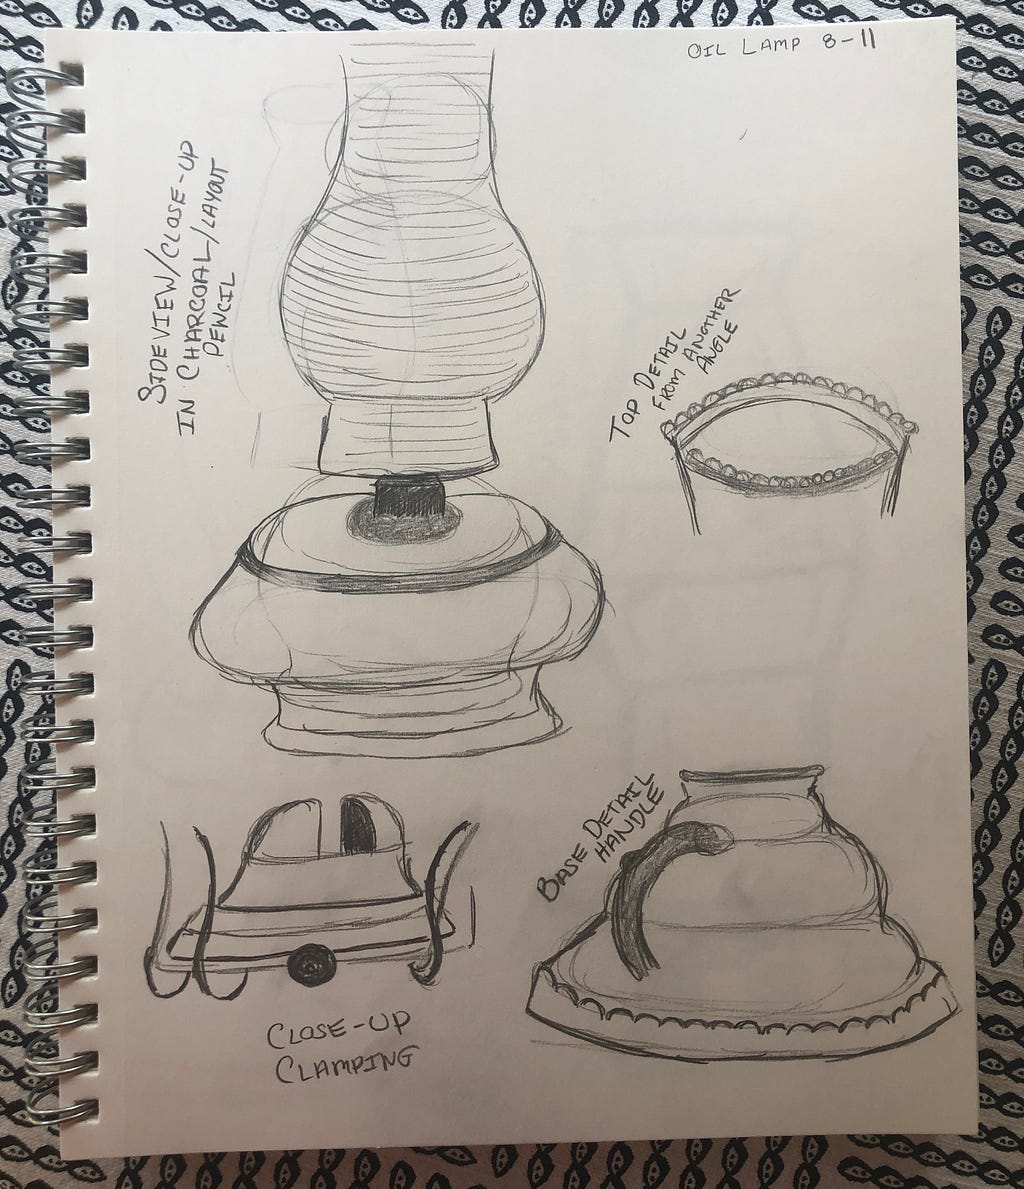 Layout pencil sketches of an oil lamp.